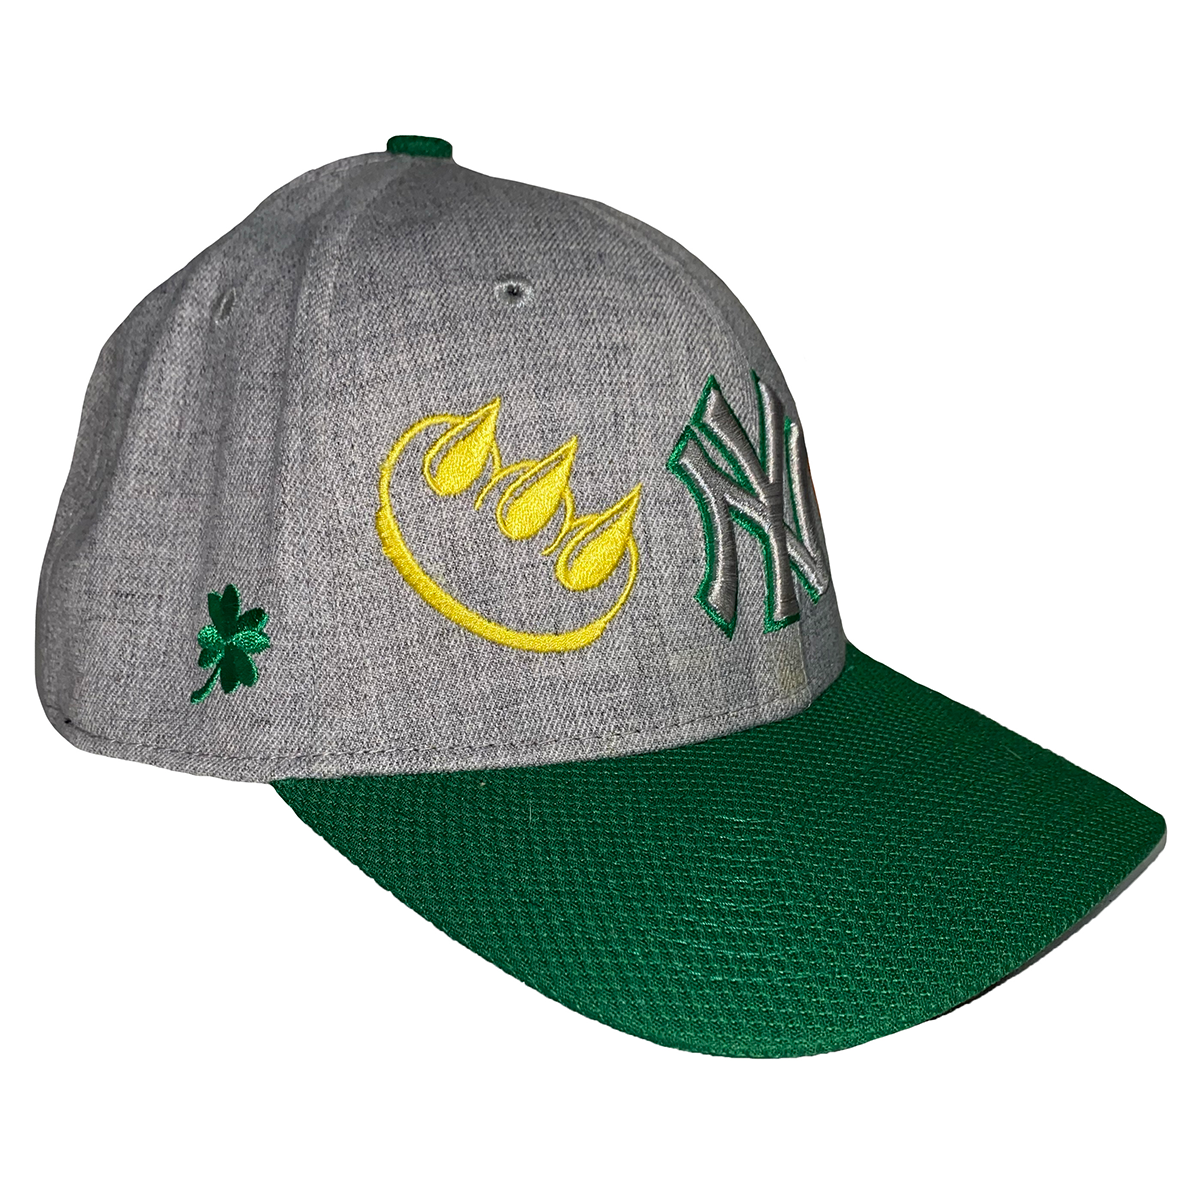 GREEN & GREY EMBROIDERED YANKEES CLAW FLEX FIT HAT